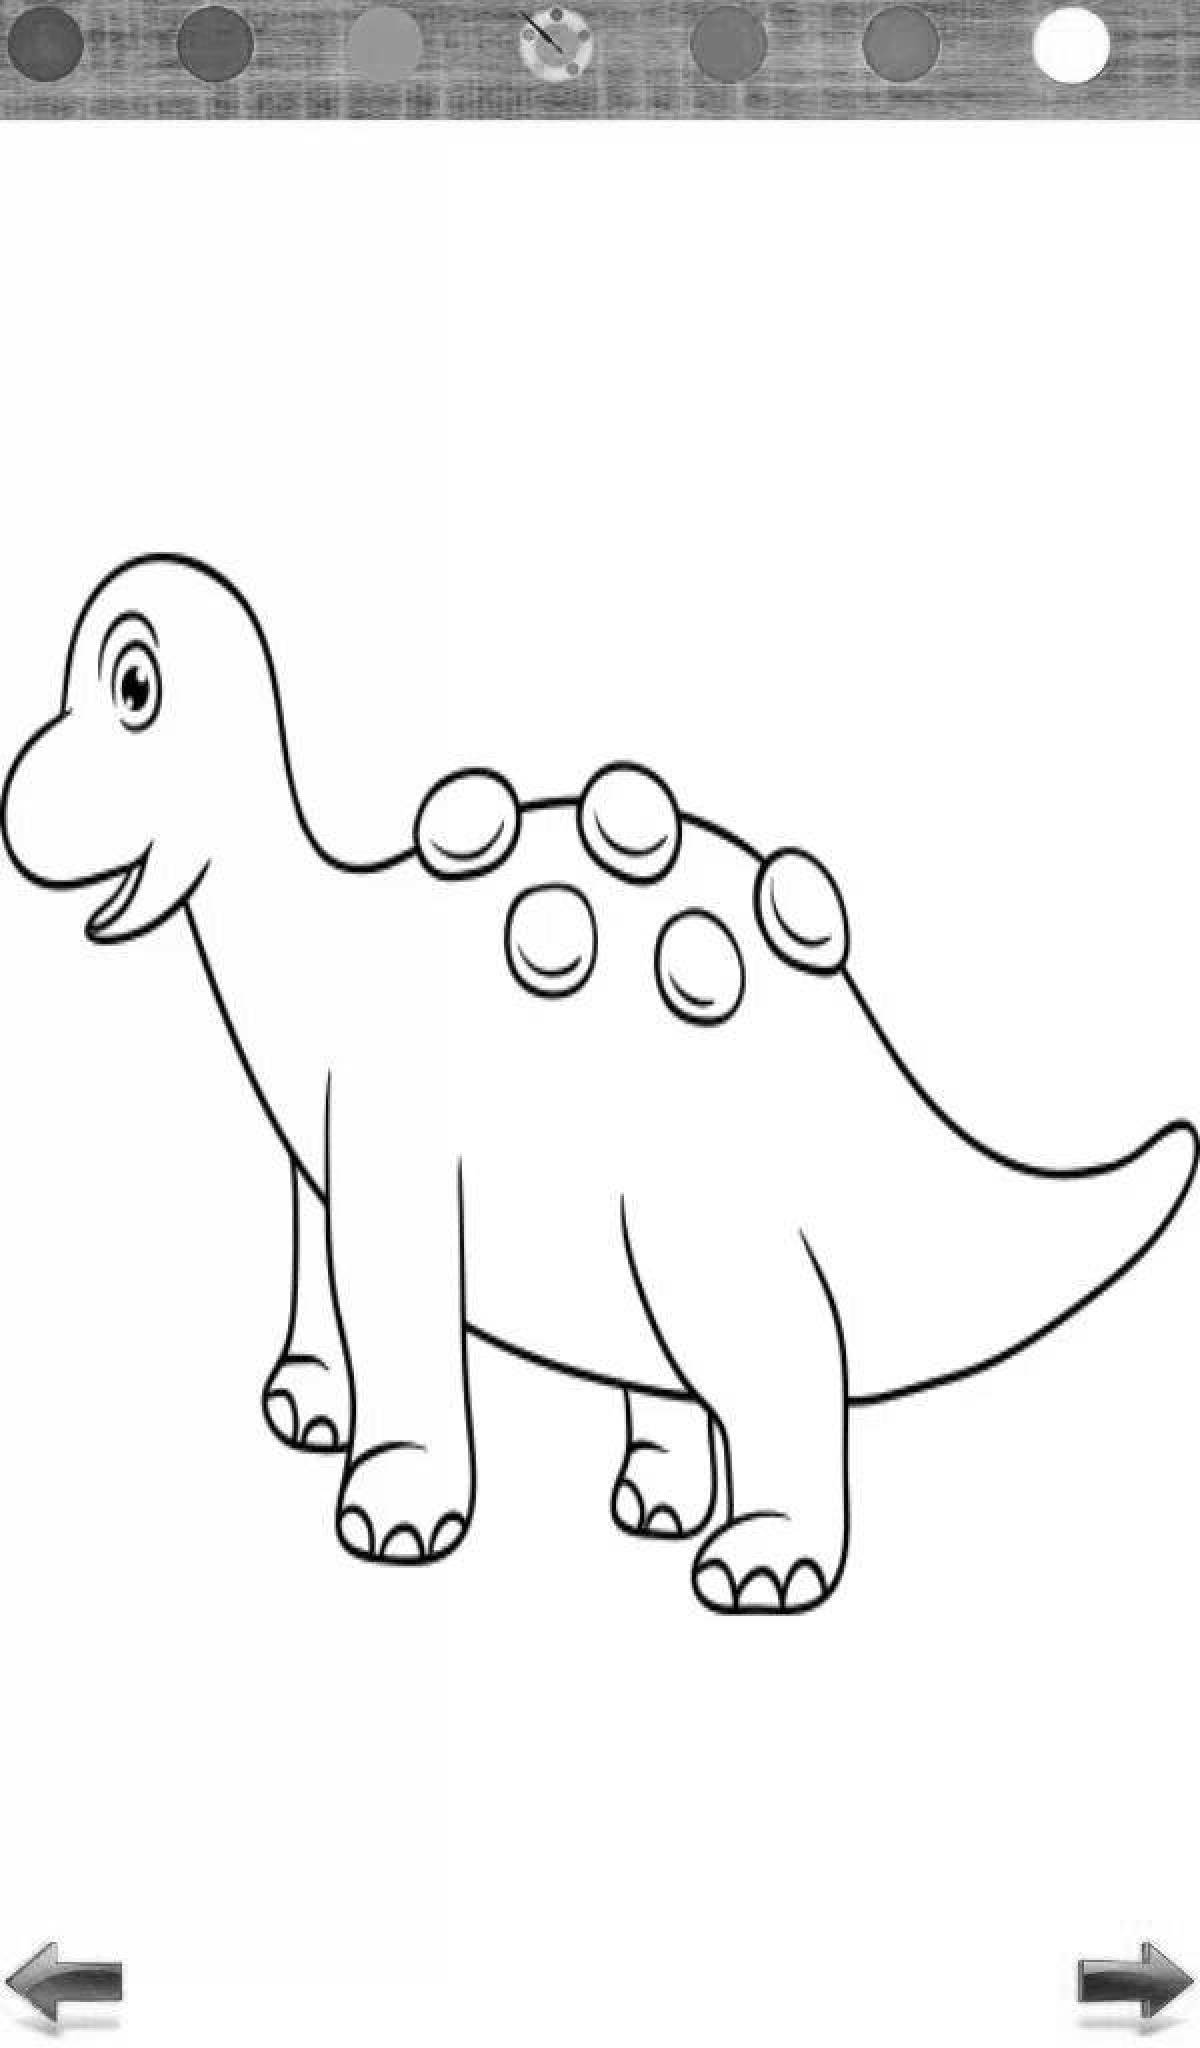 Coloring games about dinosaurs